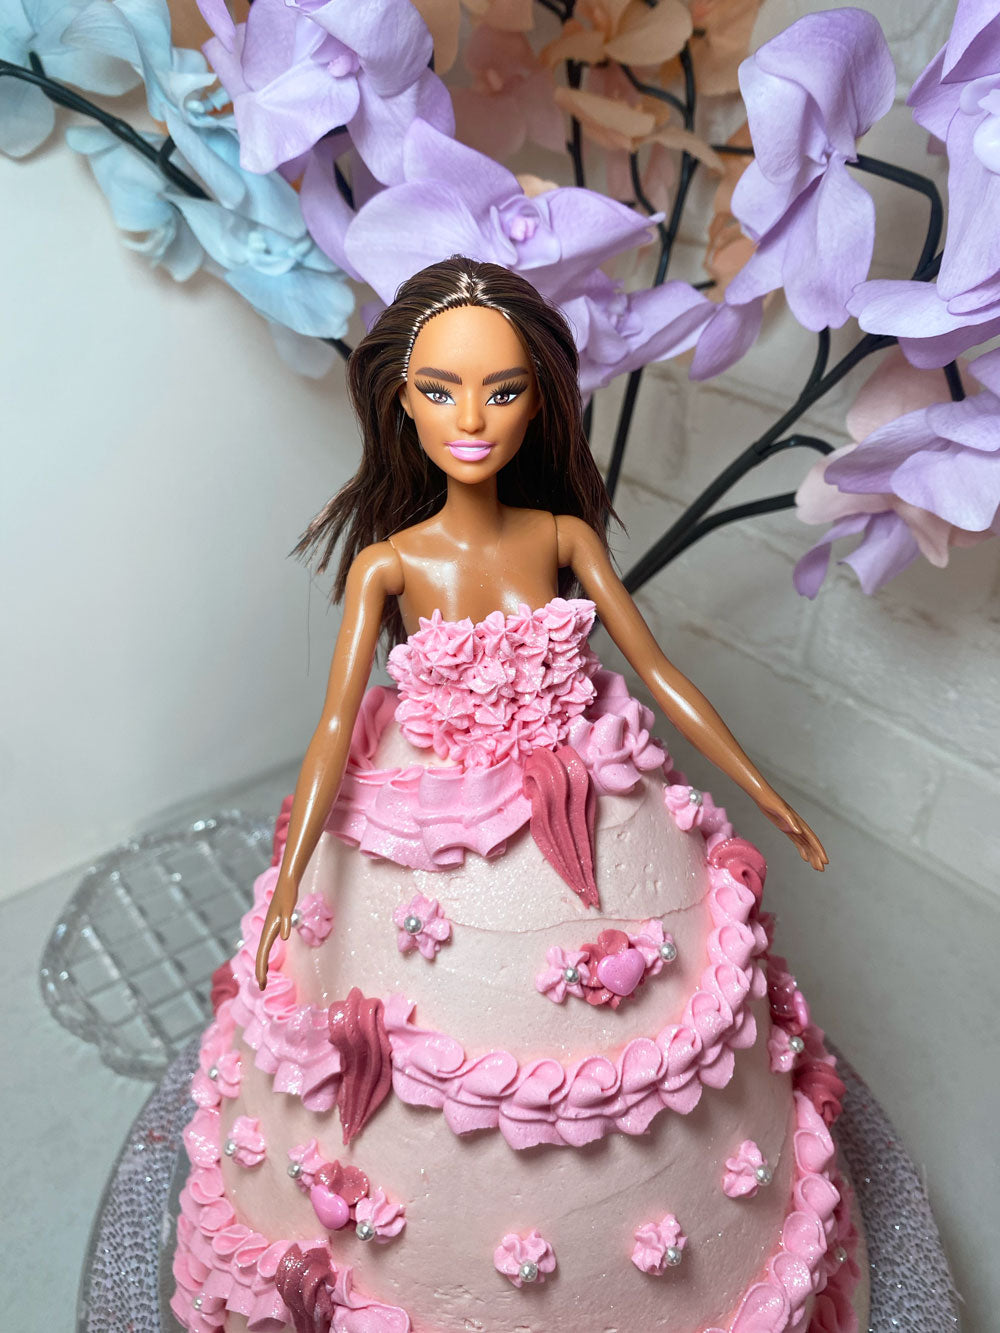 Barbie Doll Cake | Order Now